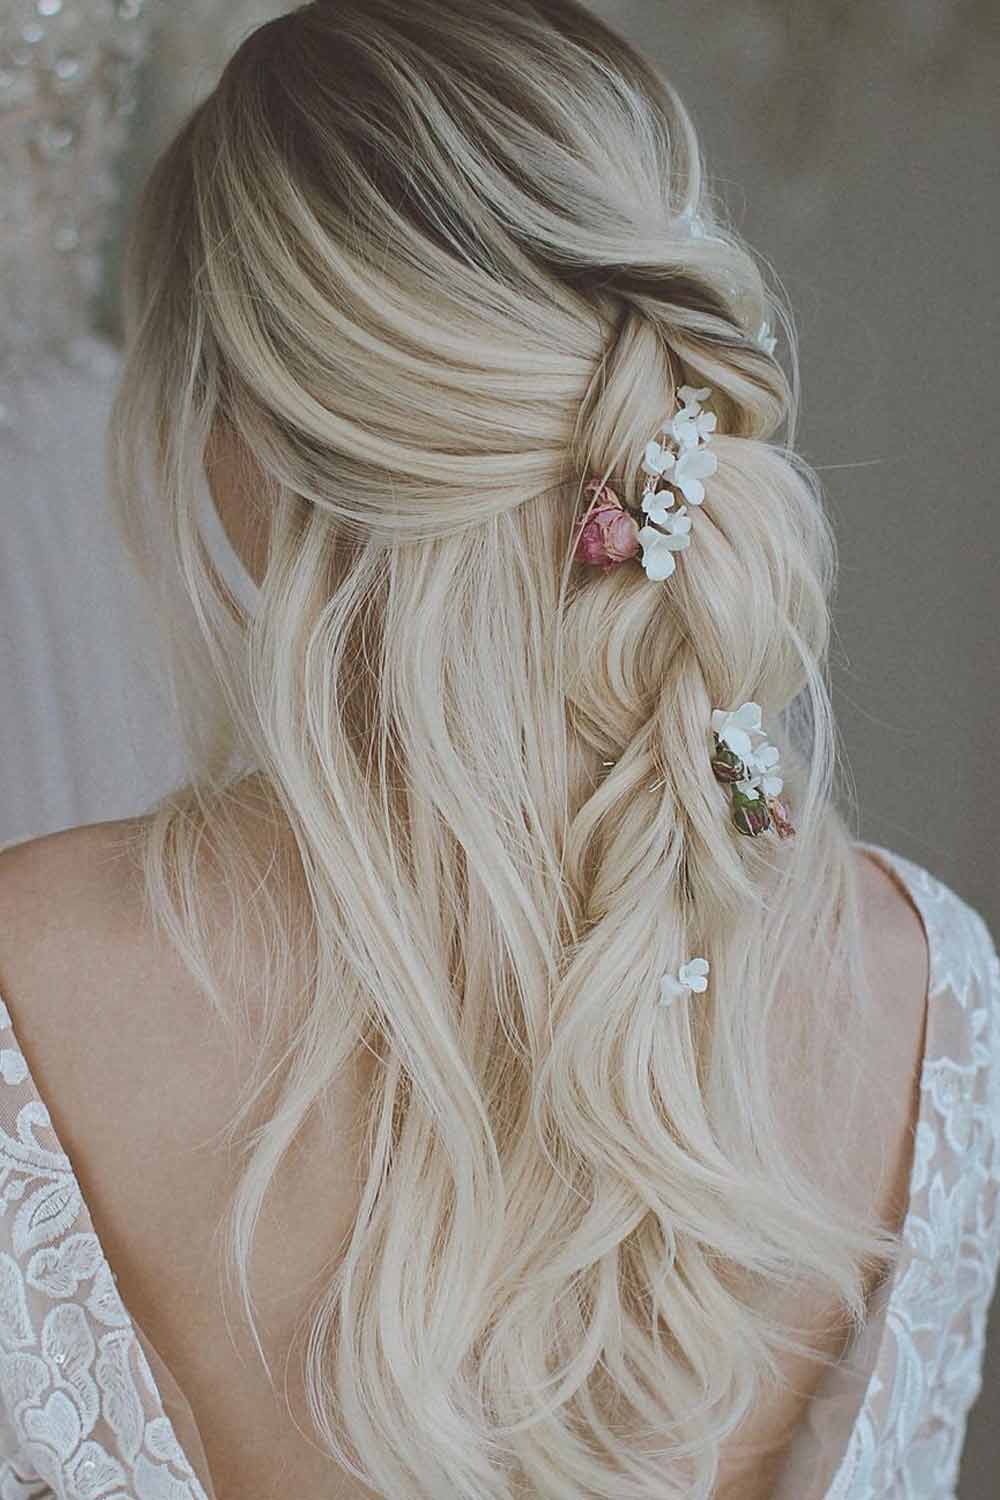 Long Braided Hairstyle with Accessories